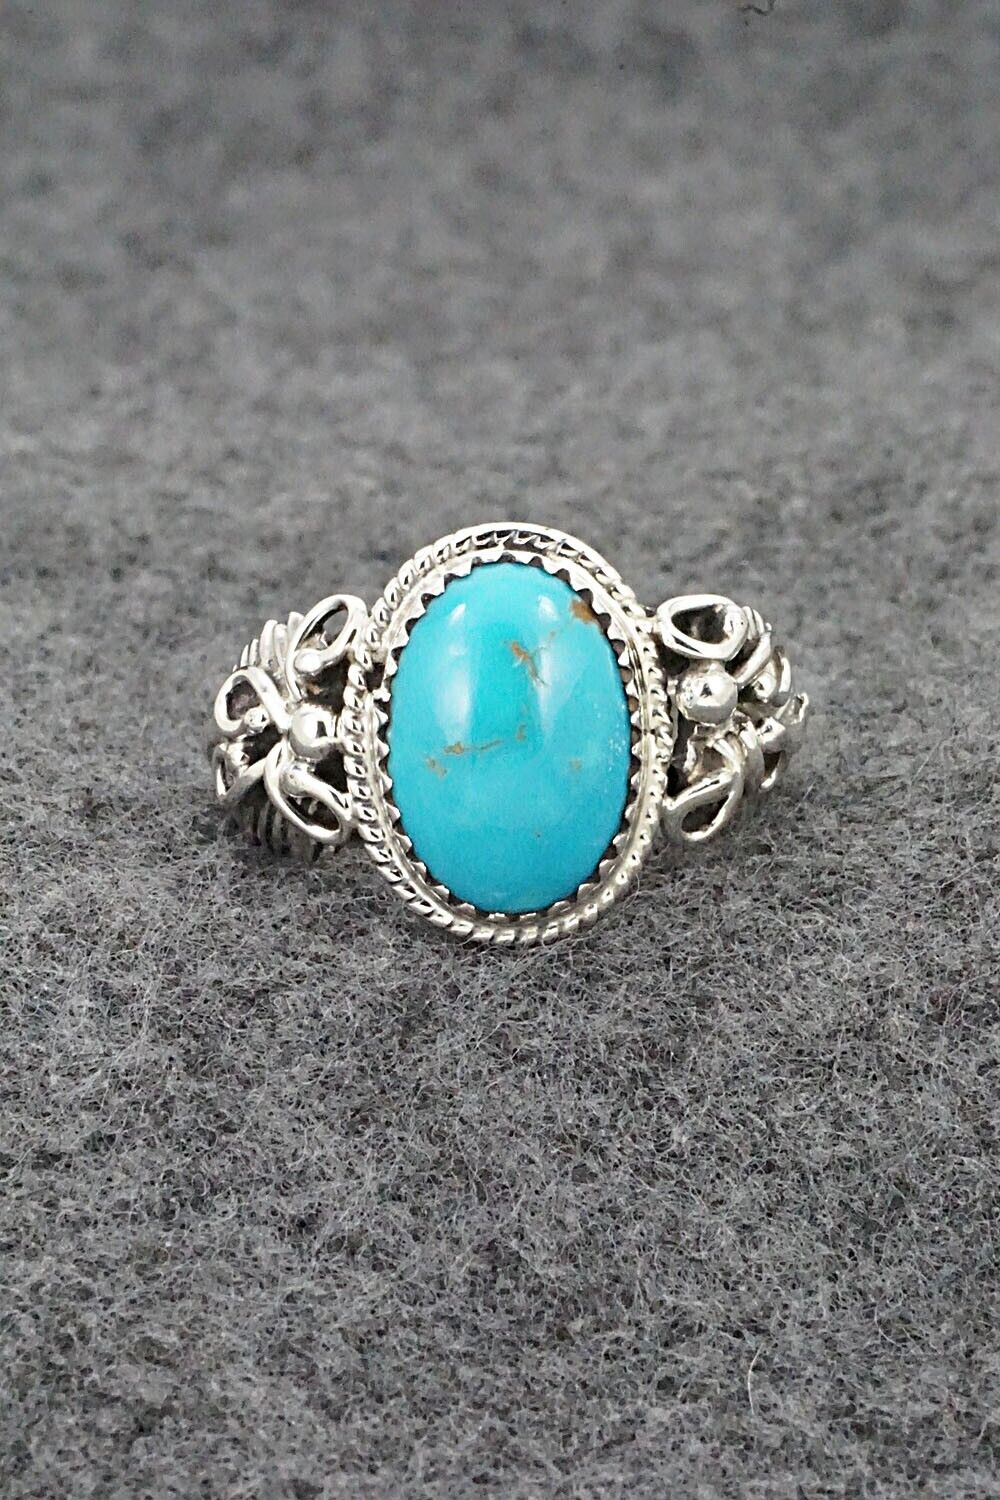 Turquoise & Sterling Silver Ring - Jeannette Saunders - Size 8.5